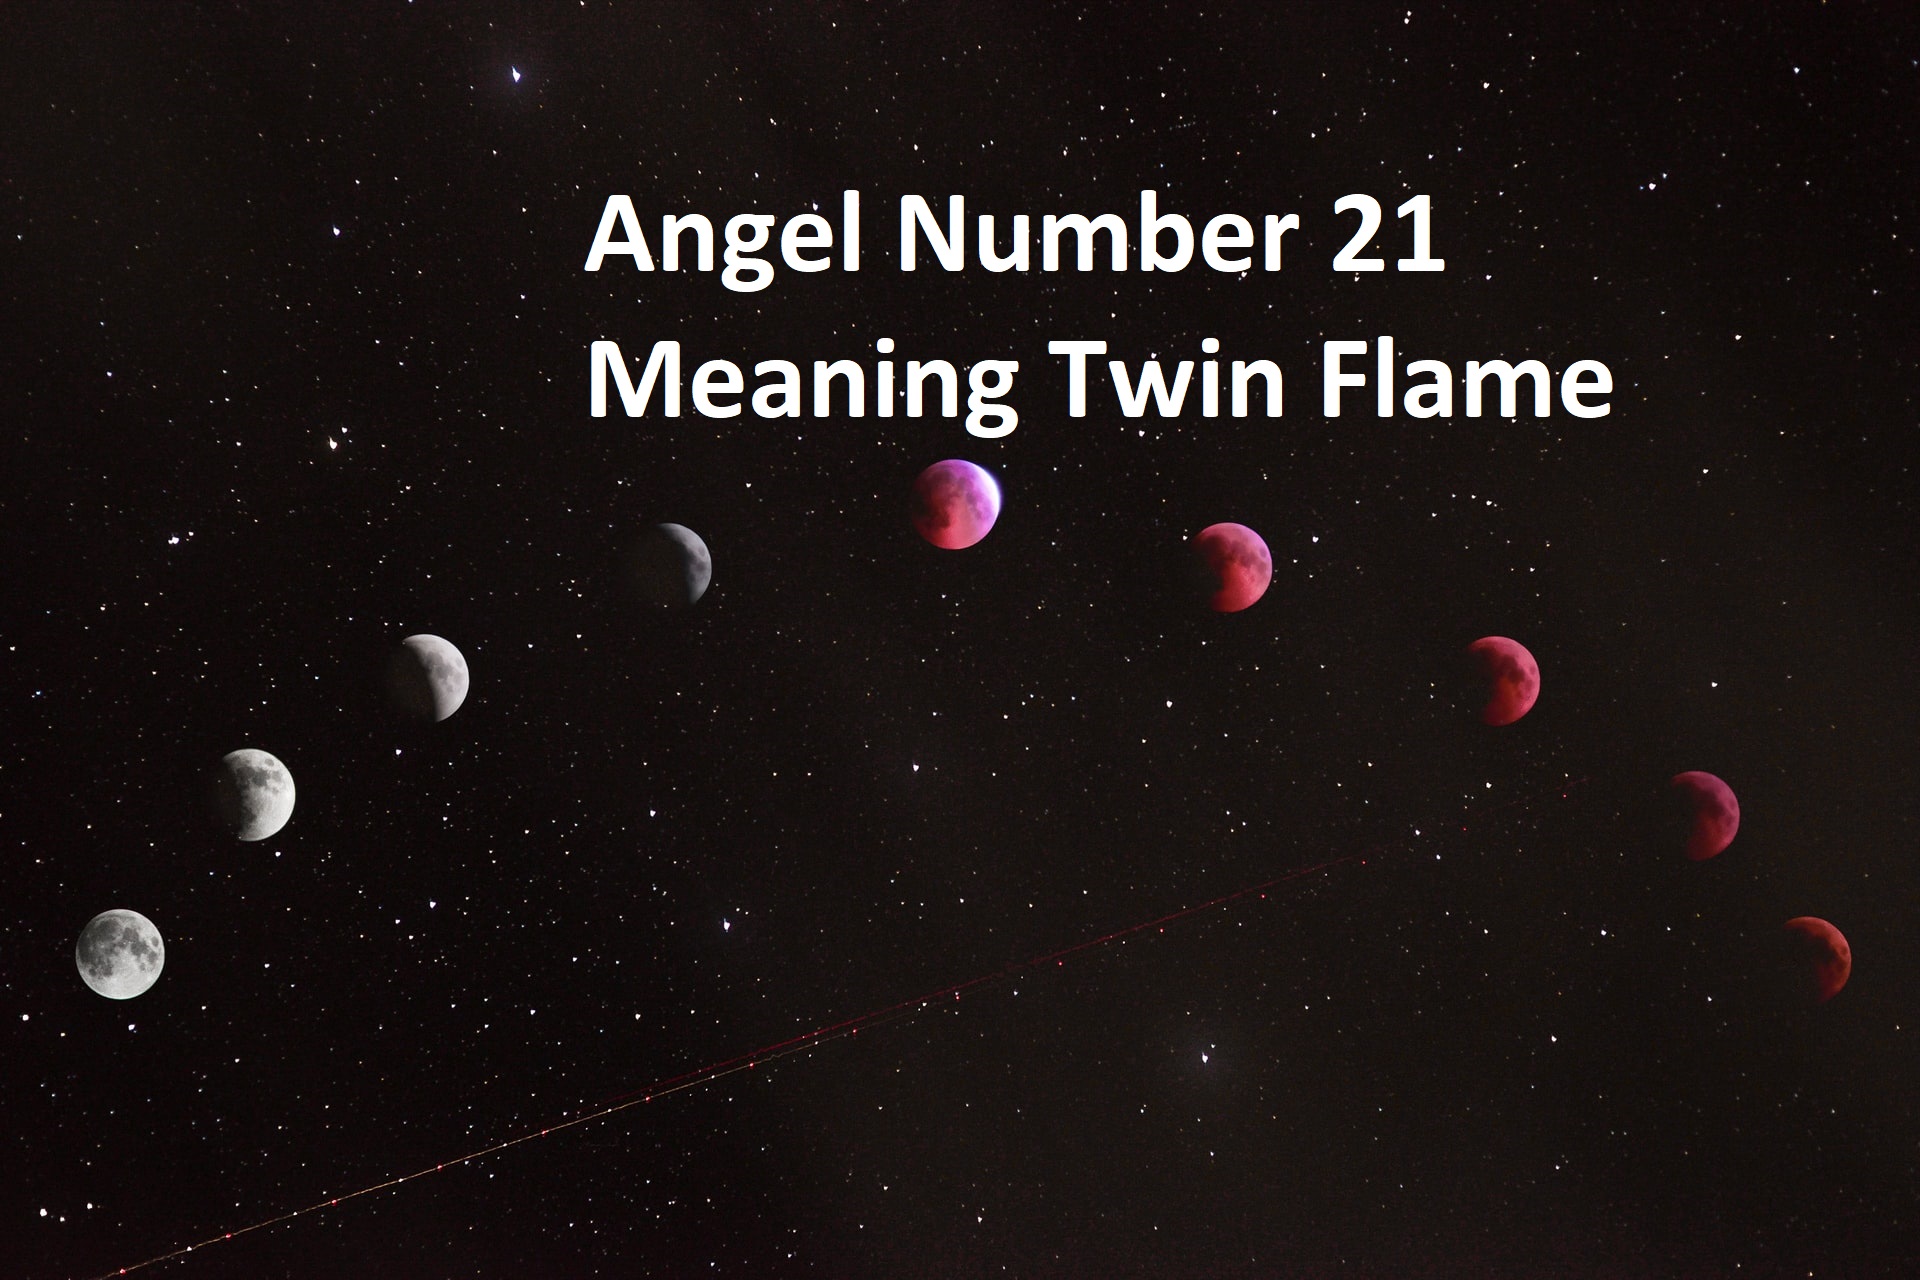 Angel Number 21 Meaning Twin Flame